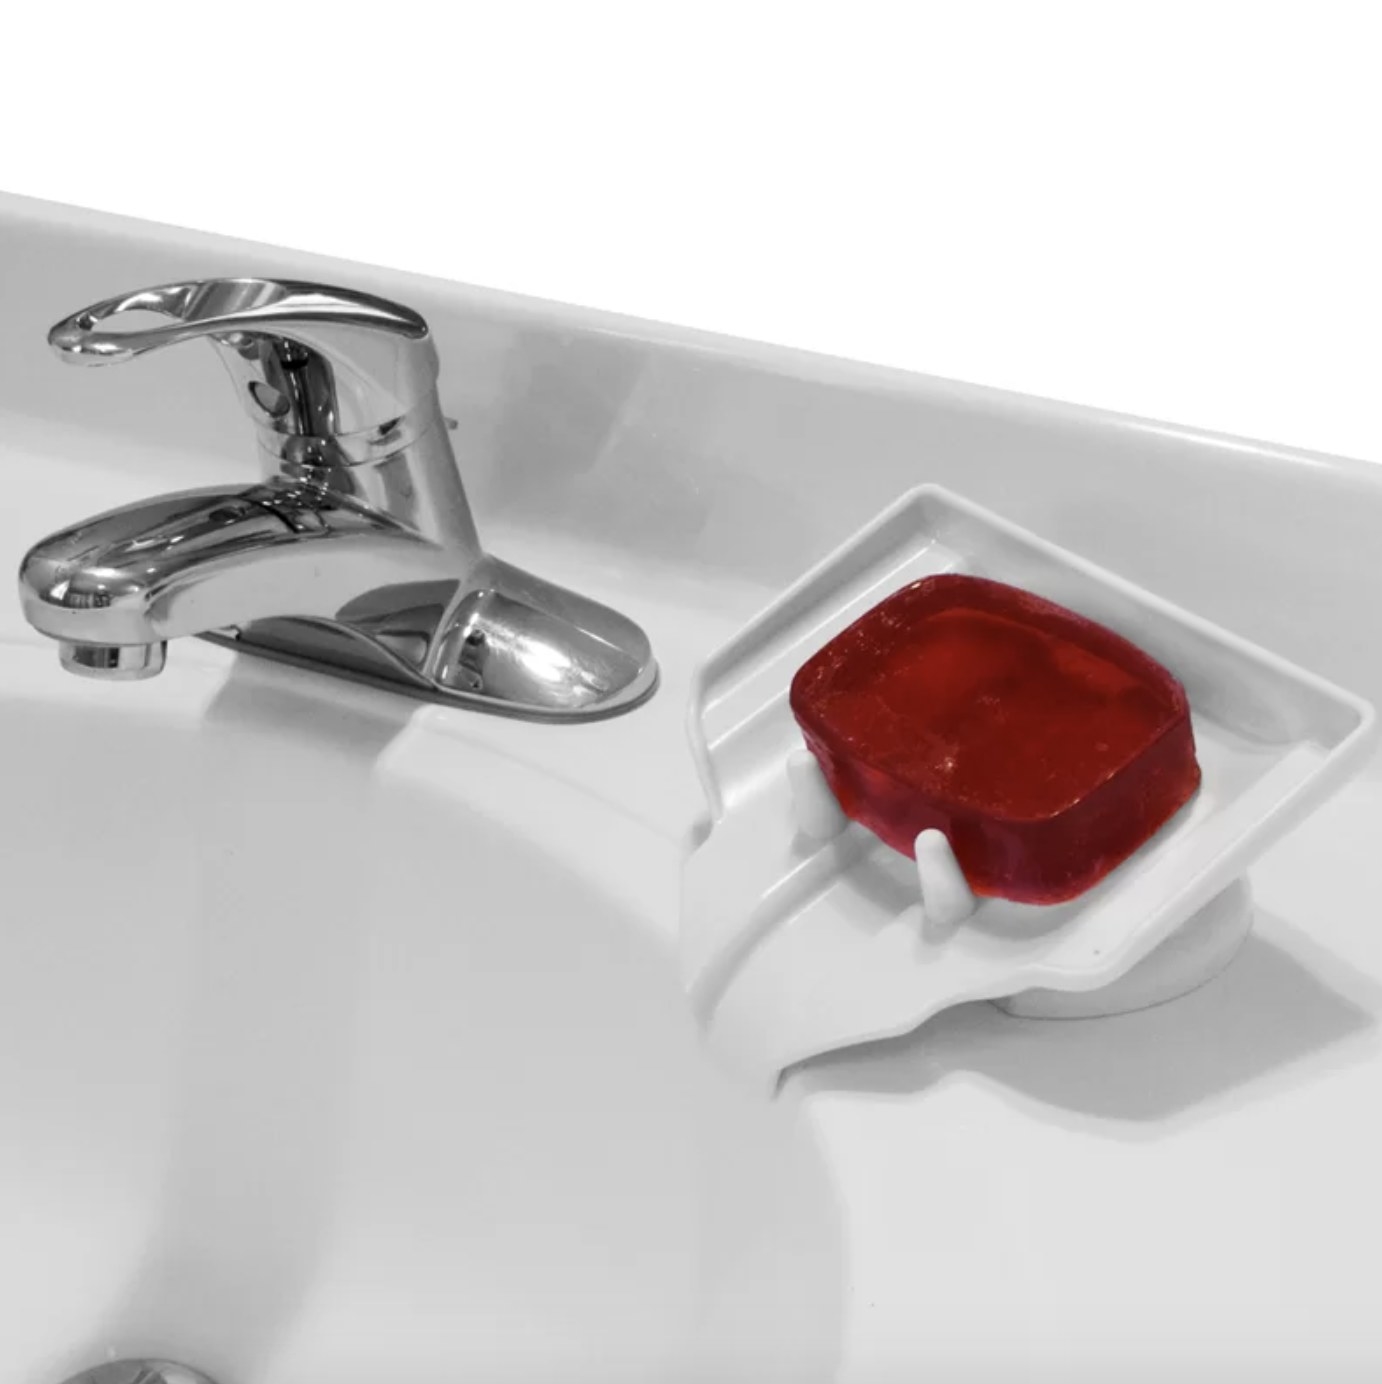 A bright red bar of soap sits atop the white soap saver with a curved waterfall spout and angled rectangular tray with two white stoppers